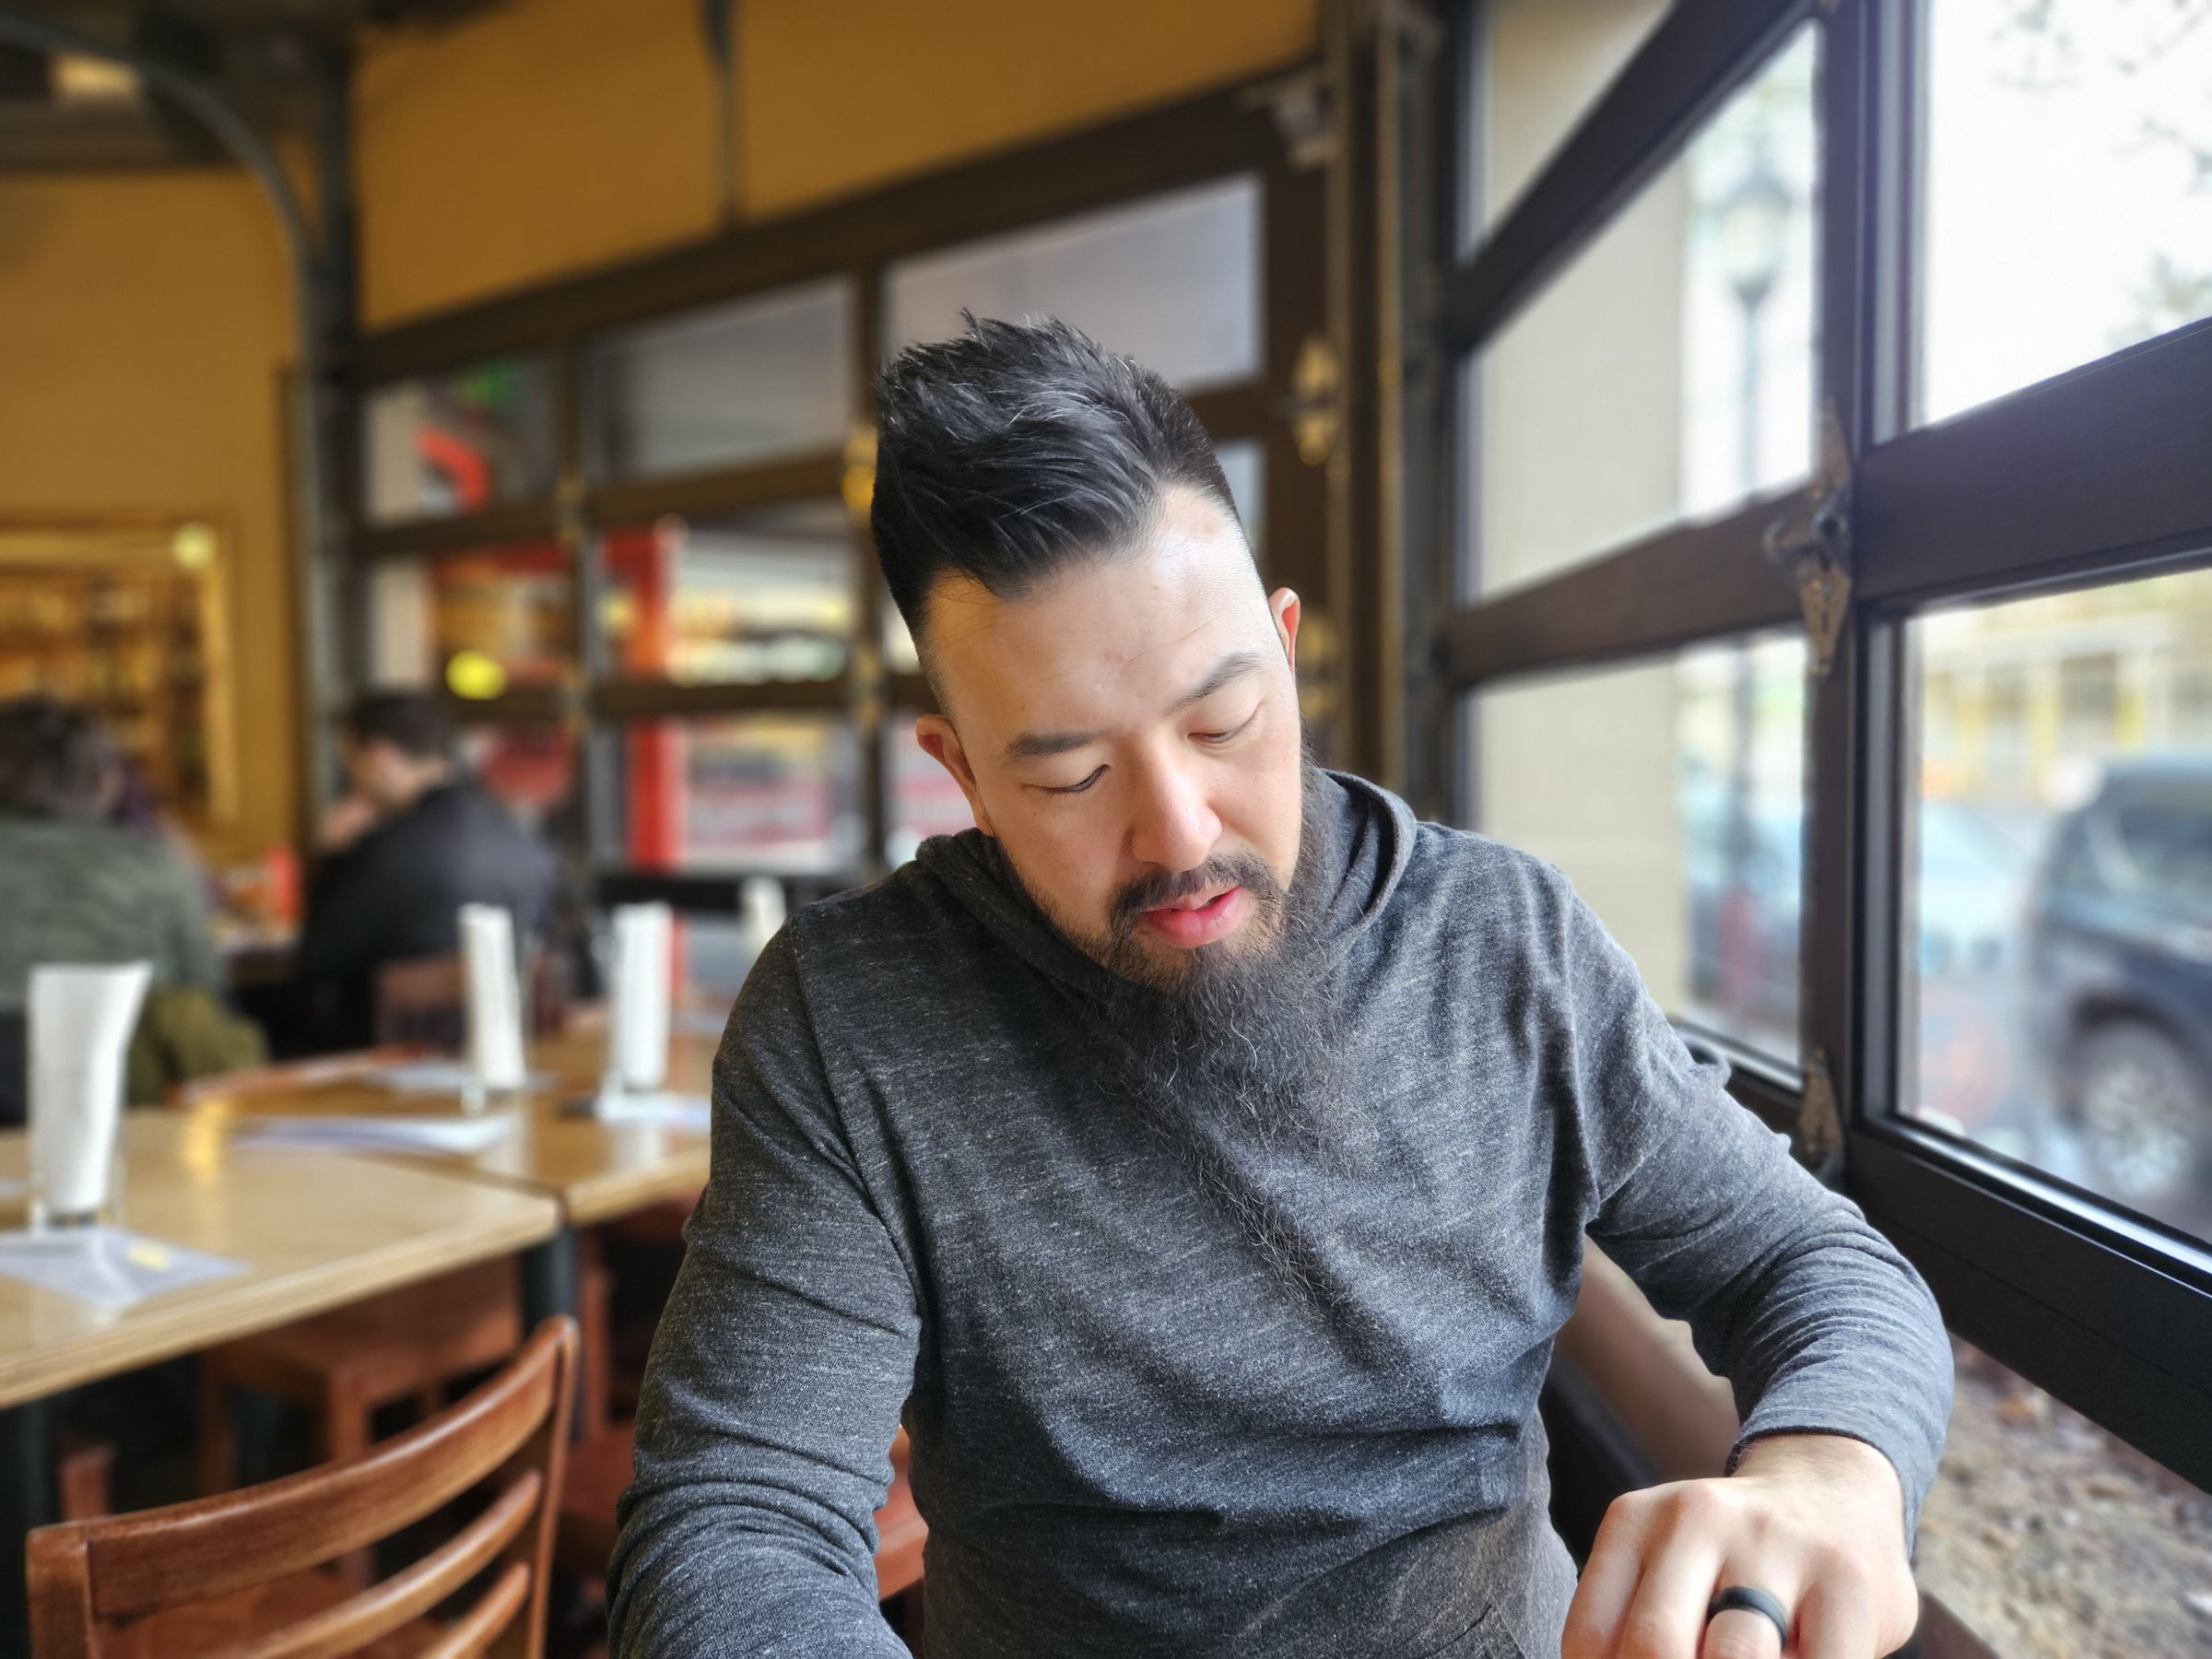 Portrait mode photo of a man sitting at a table in a restaurant with a large window to his left.